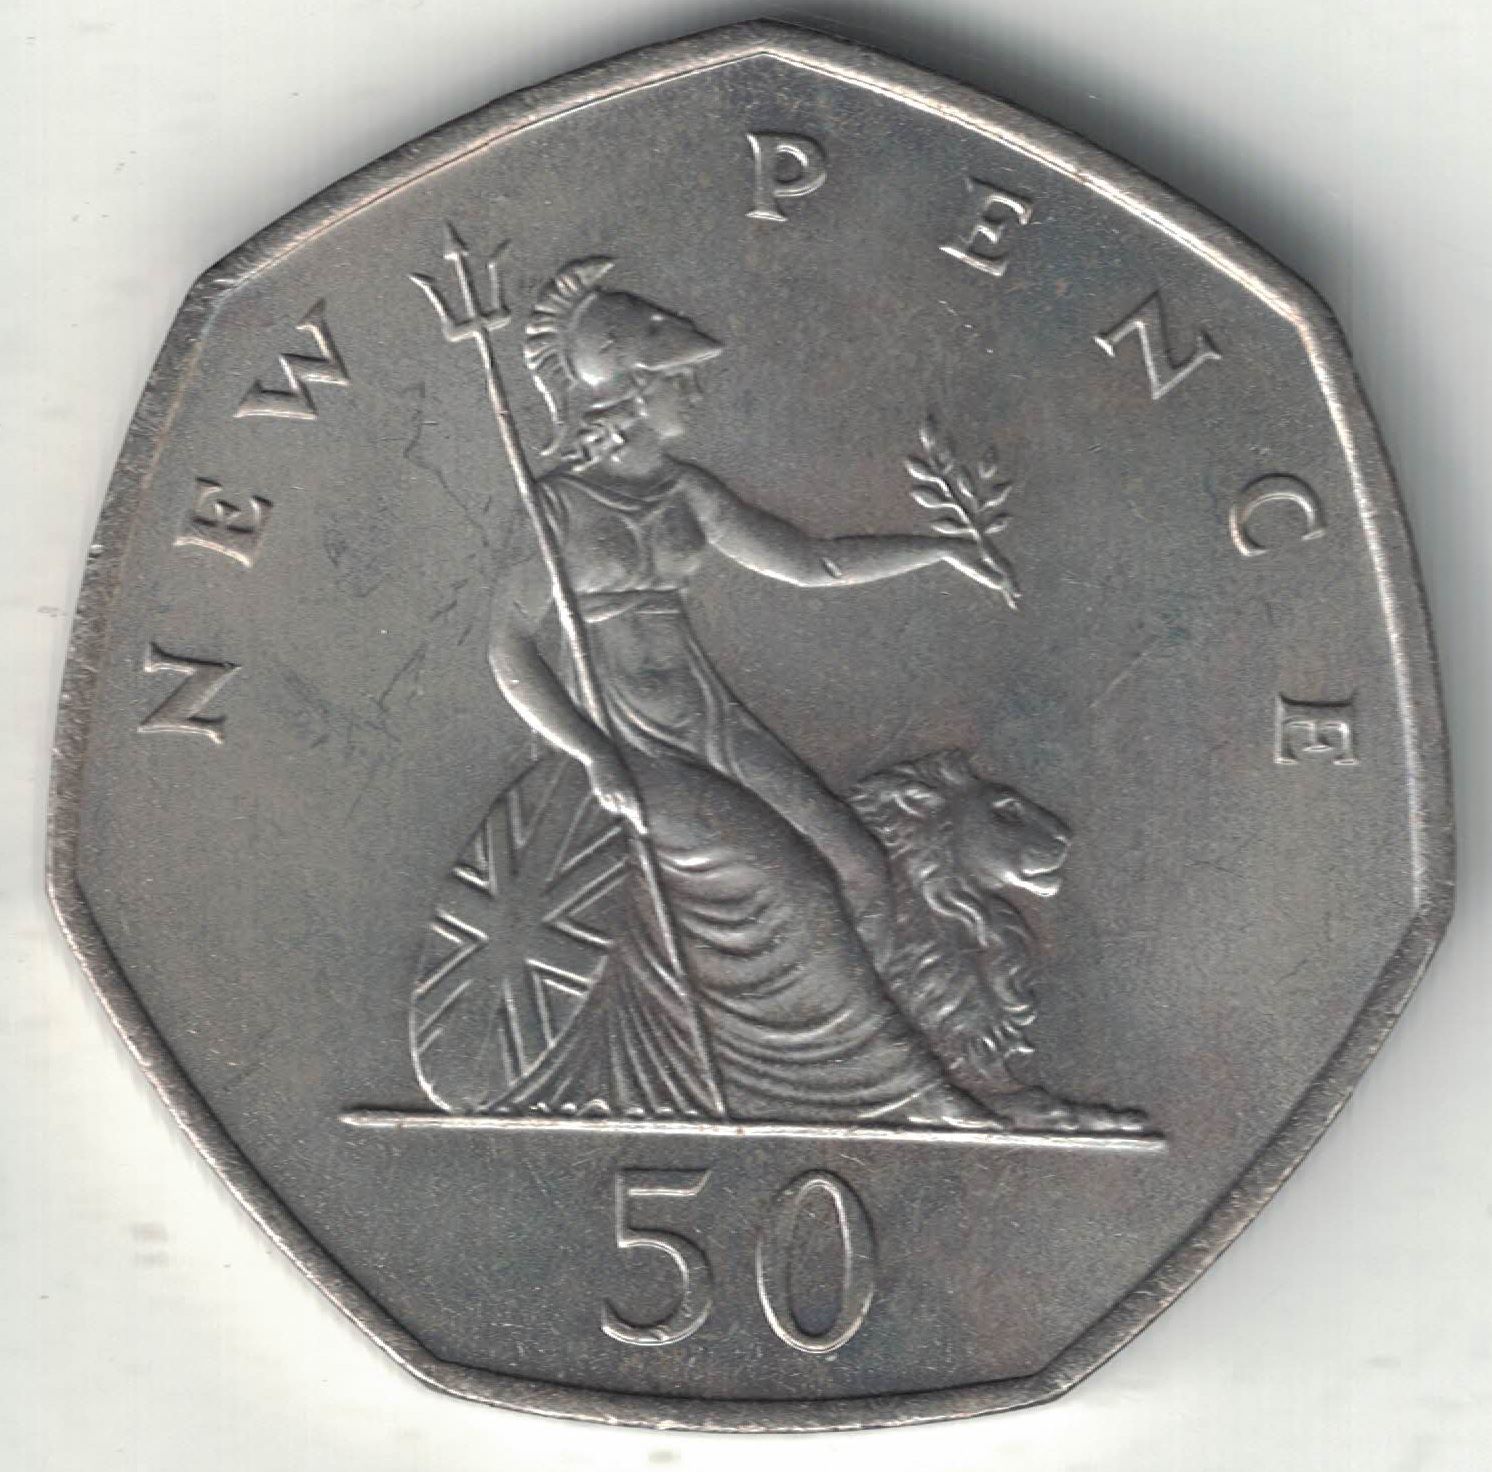 British 50 Pence Old Coin